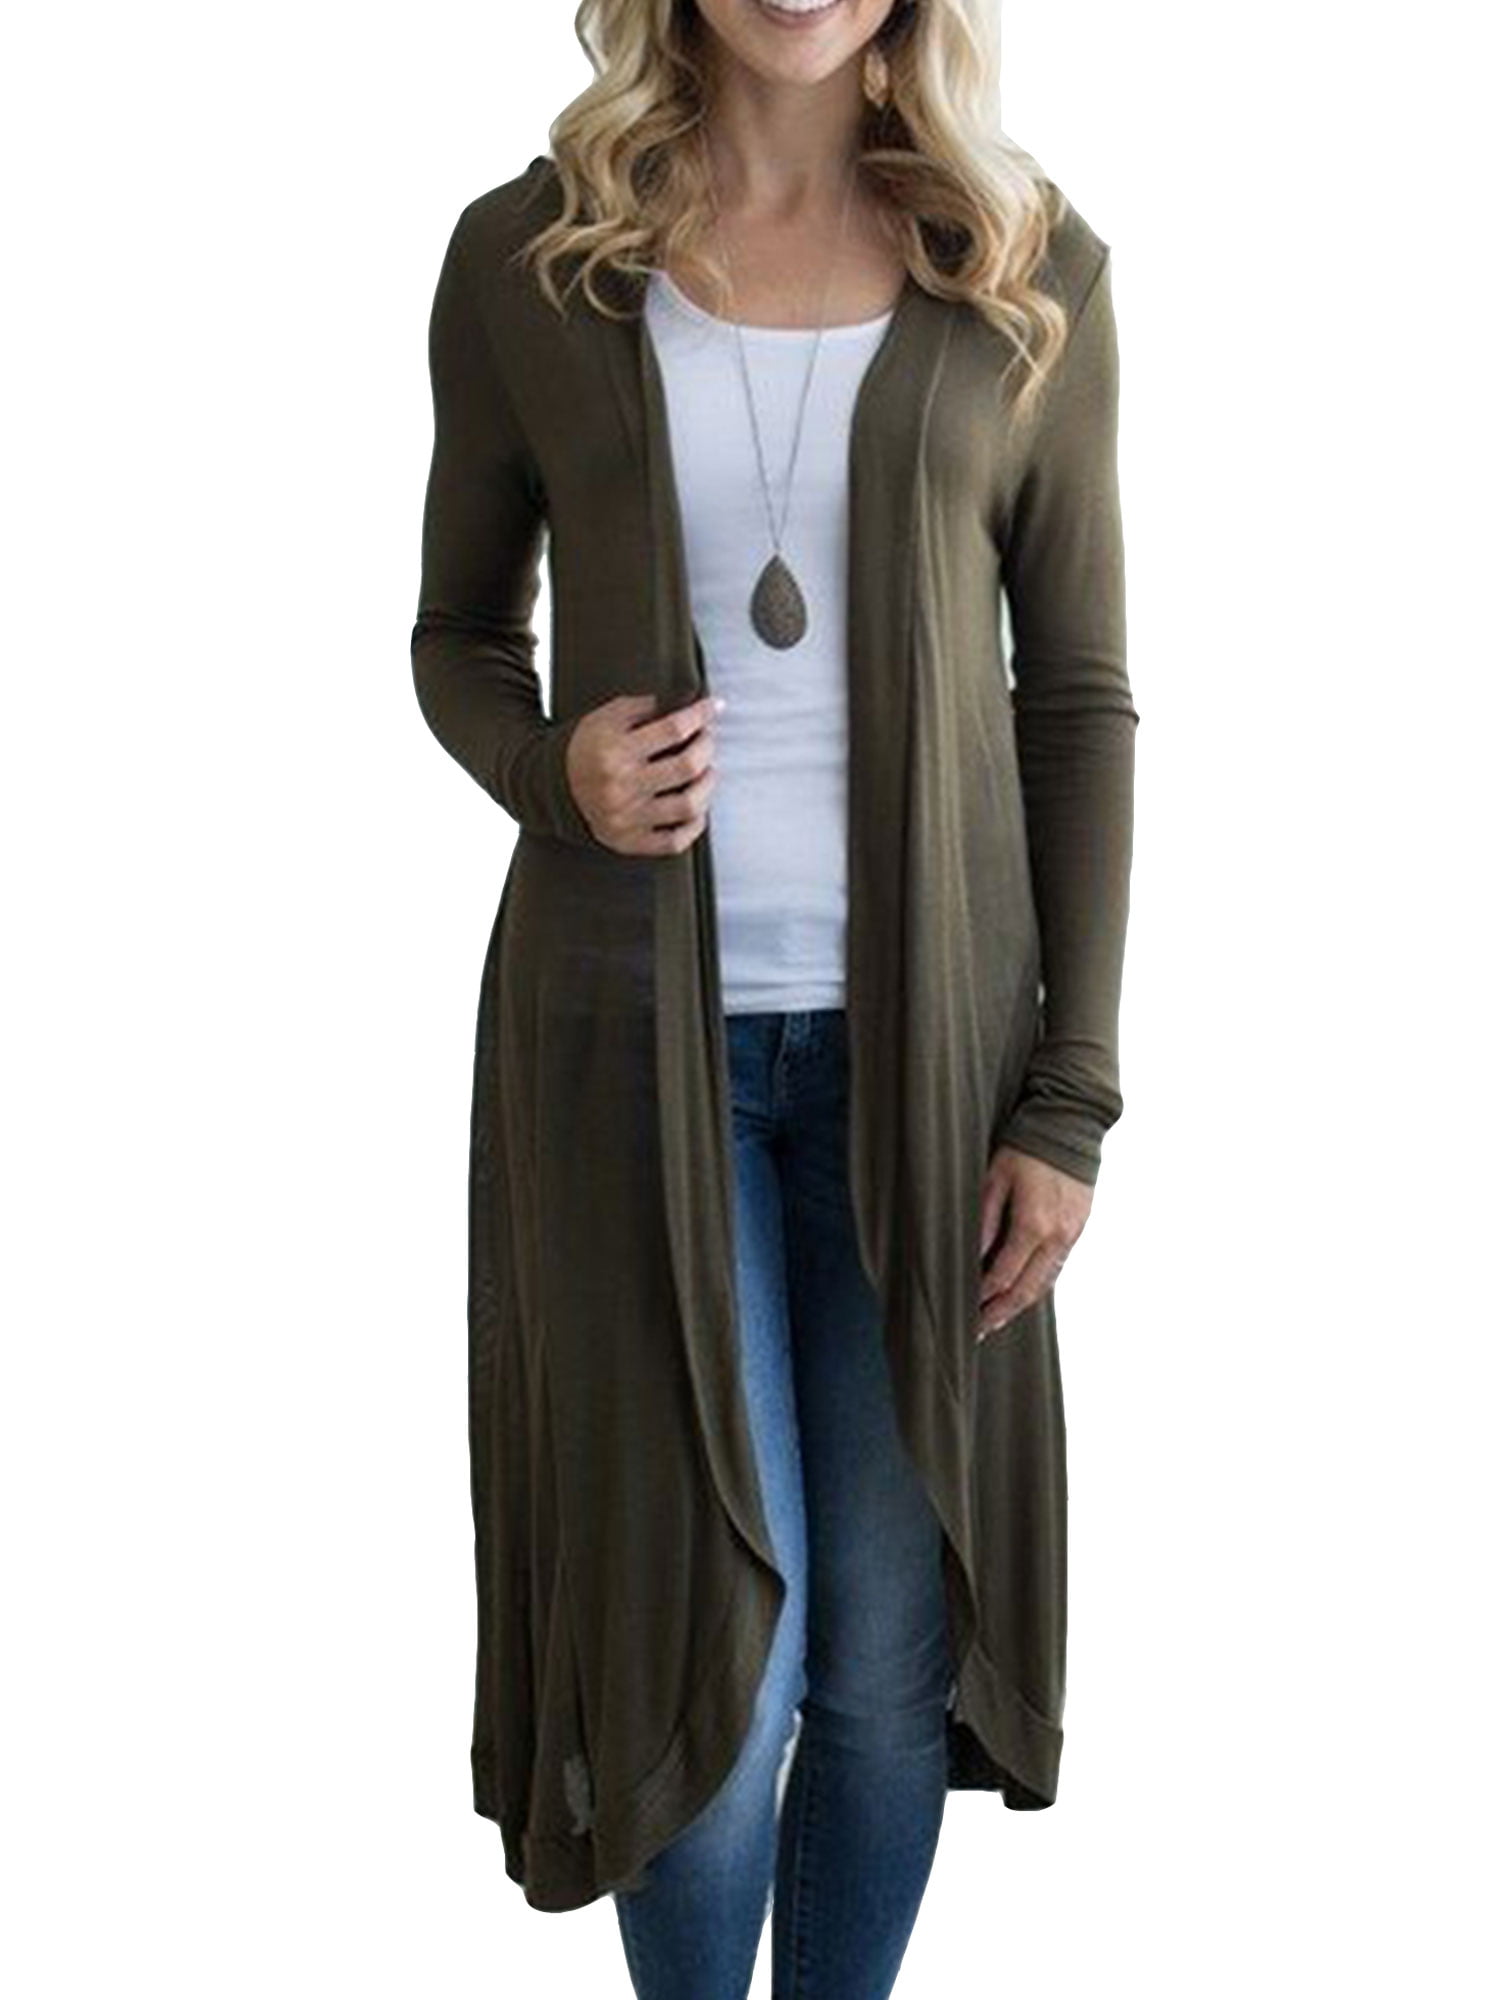 Long Sleeve Knitted Kimono Cardigan Sweater for Women Ladies Long Knit ...